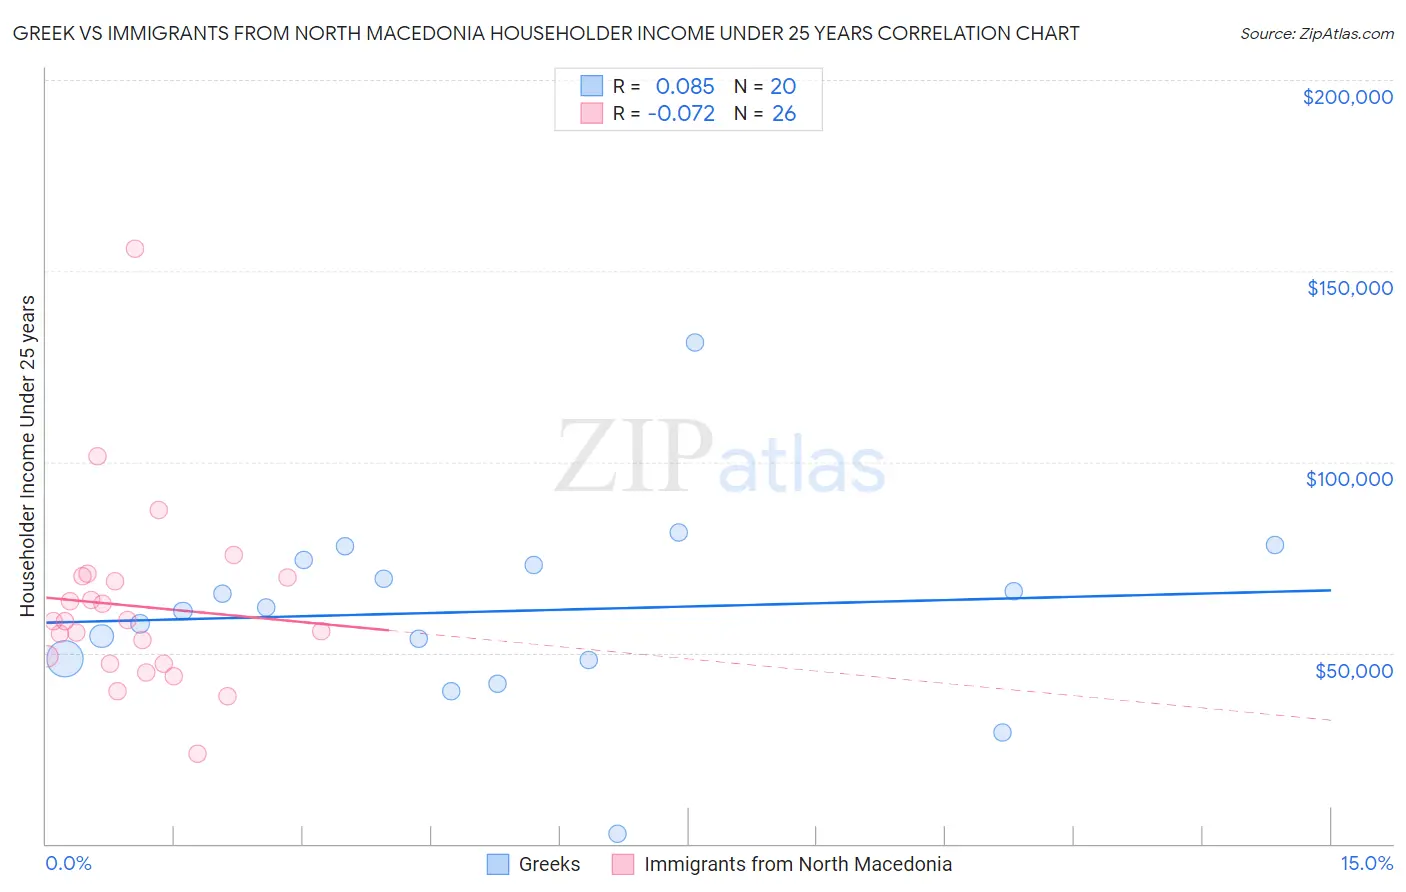 Greek vs Immigrants from North Macedonia Householder Income Under 25 years